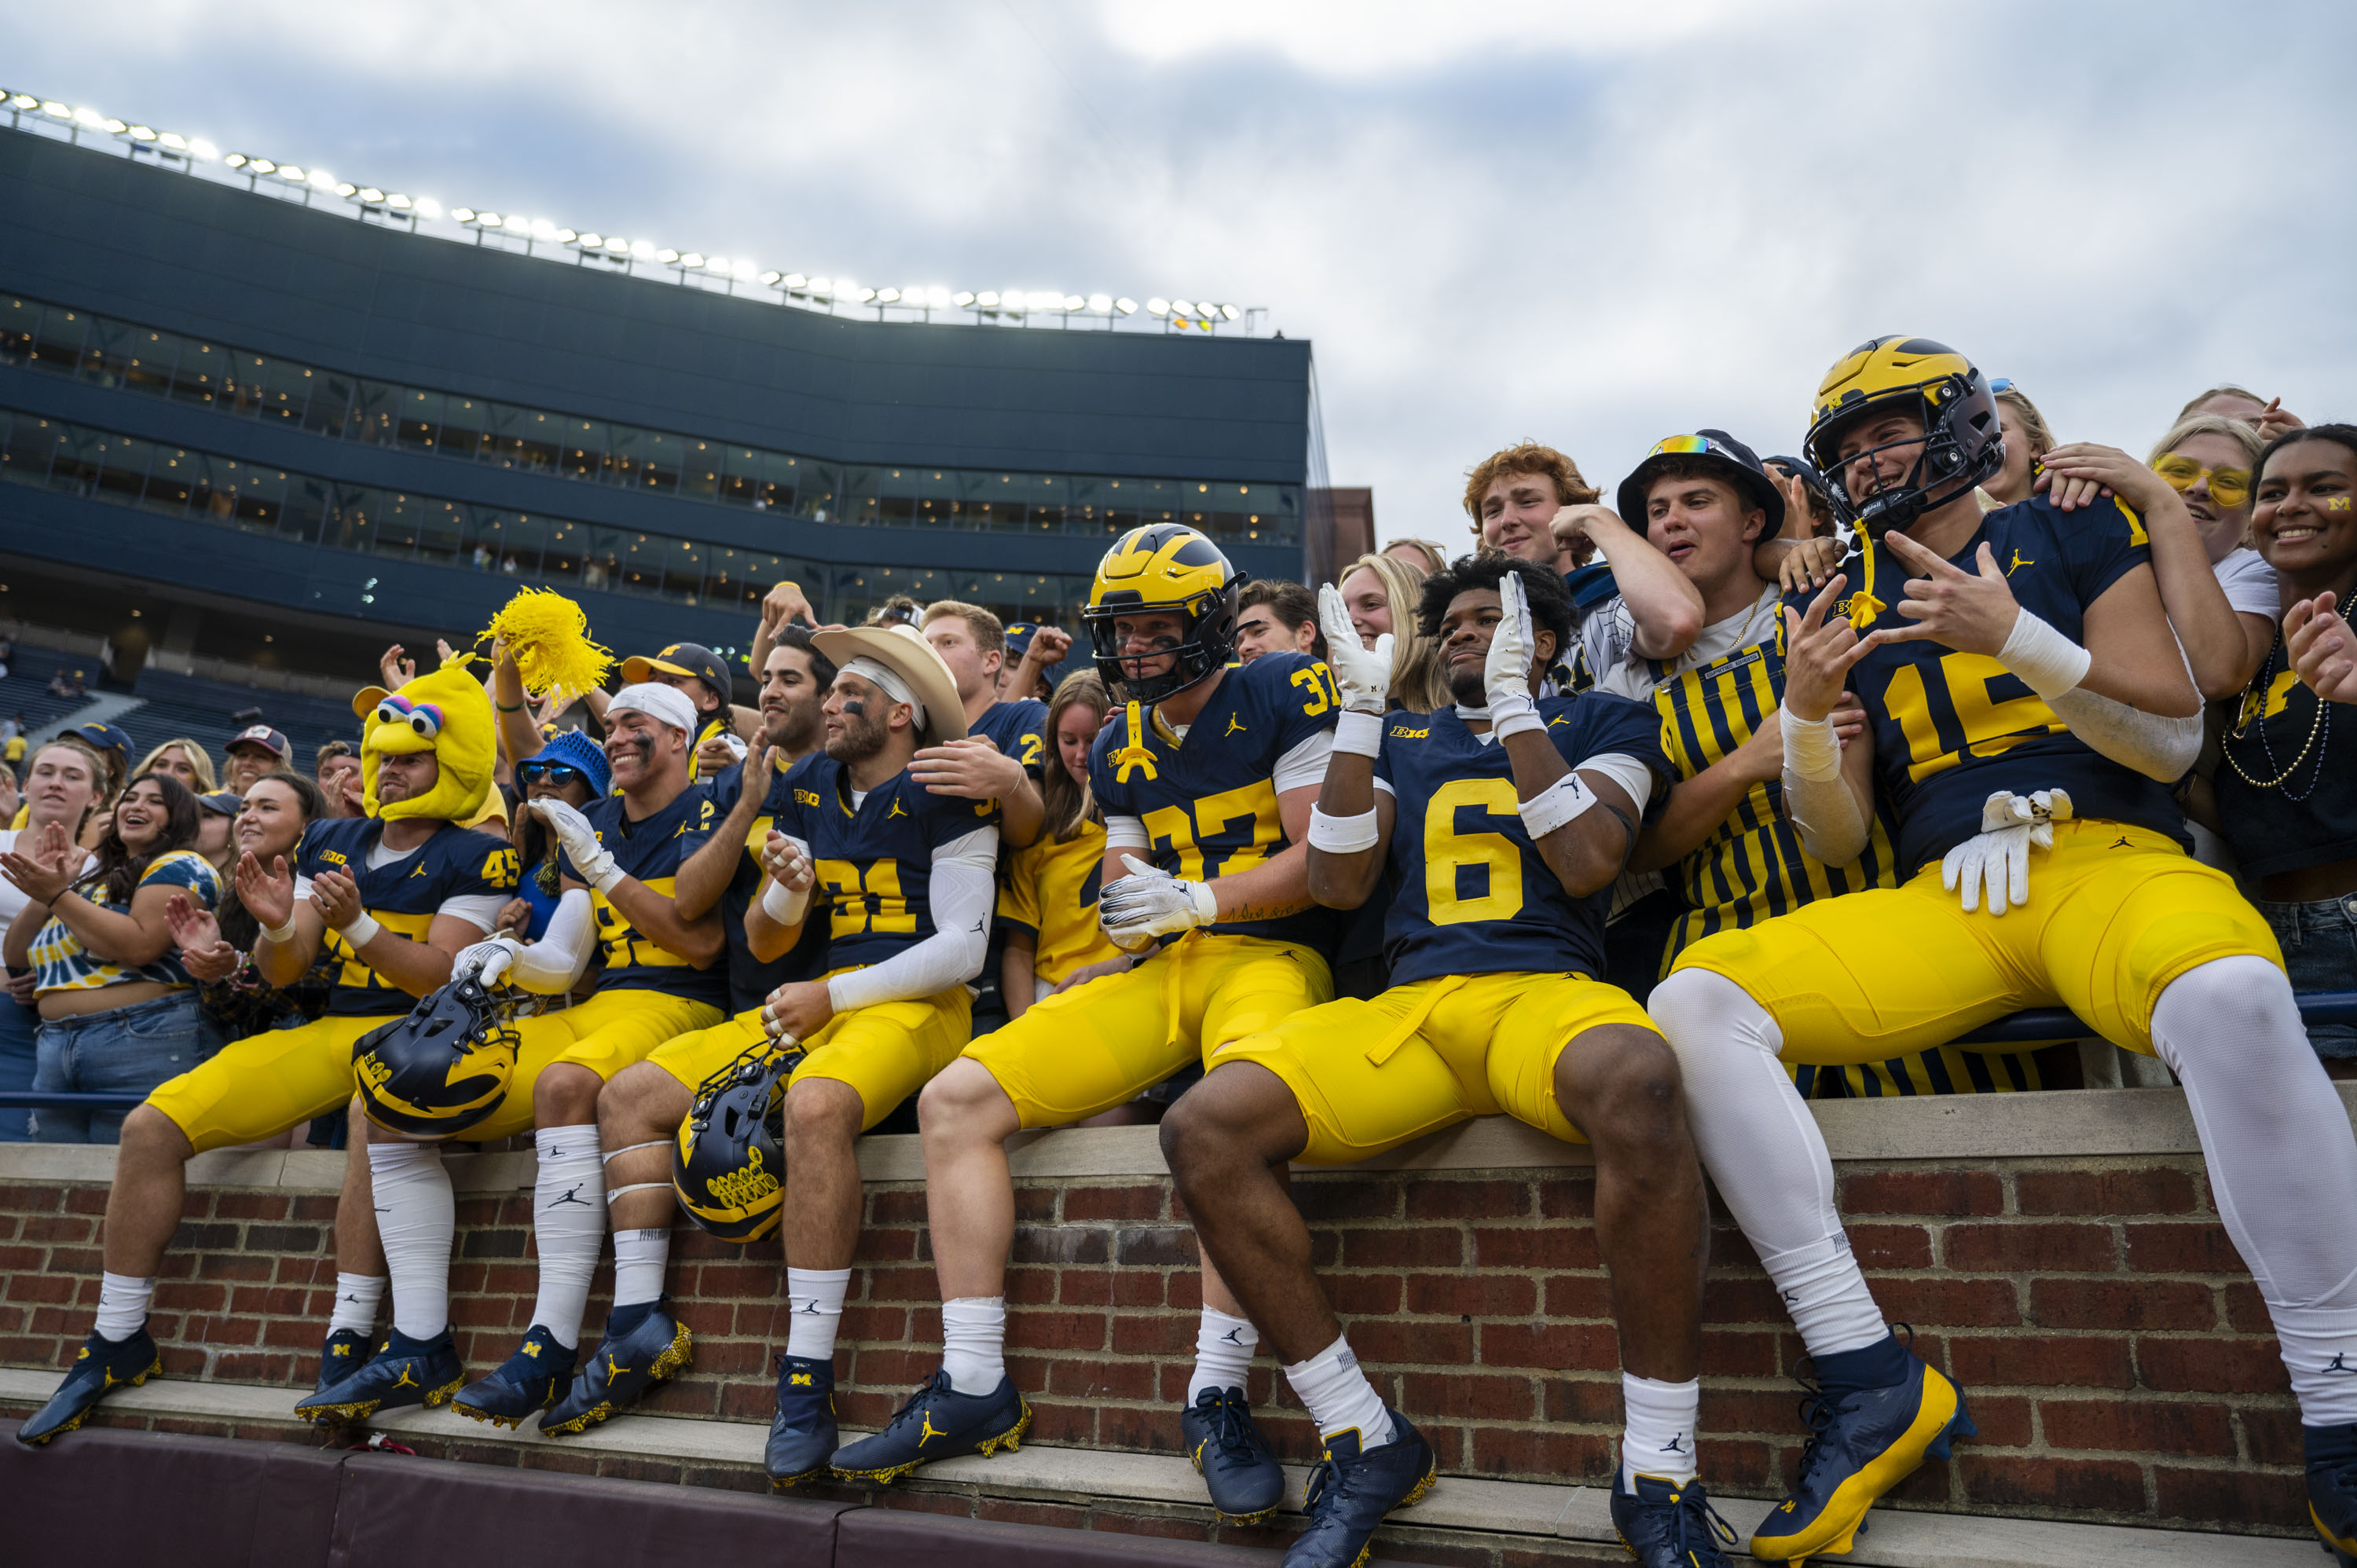 The Big House bag policy: What's allowed, what's prohibited at Michigan  Football games